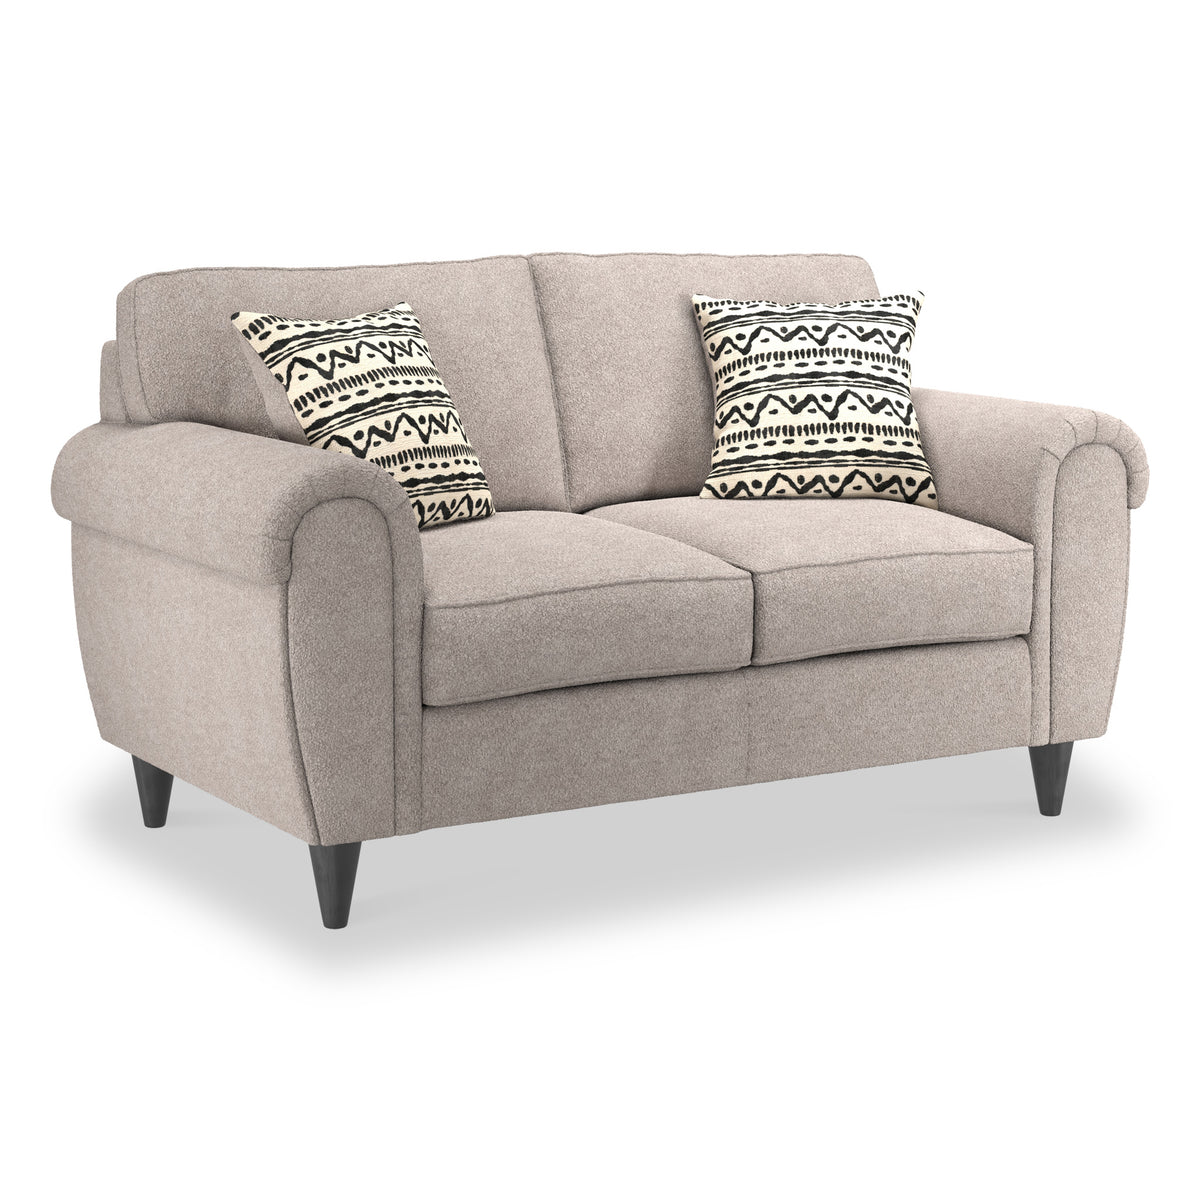 Jessie Mink Boucle 2 Seater Sofa from Roseland Furniture